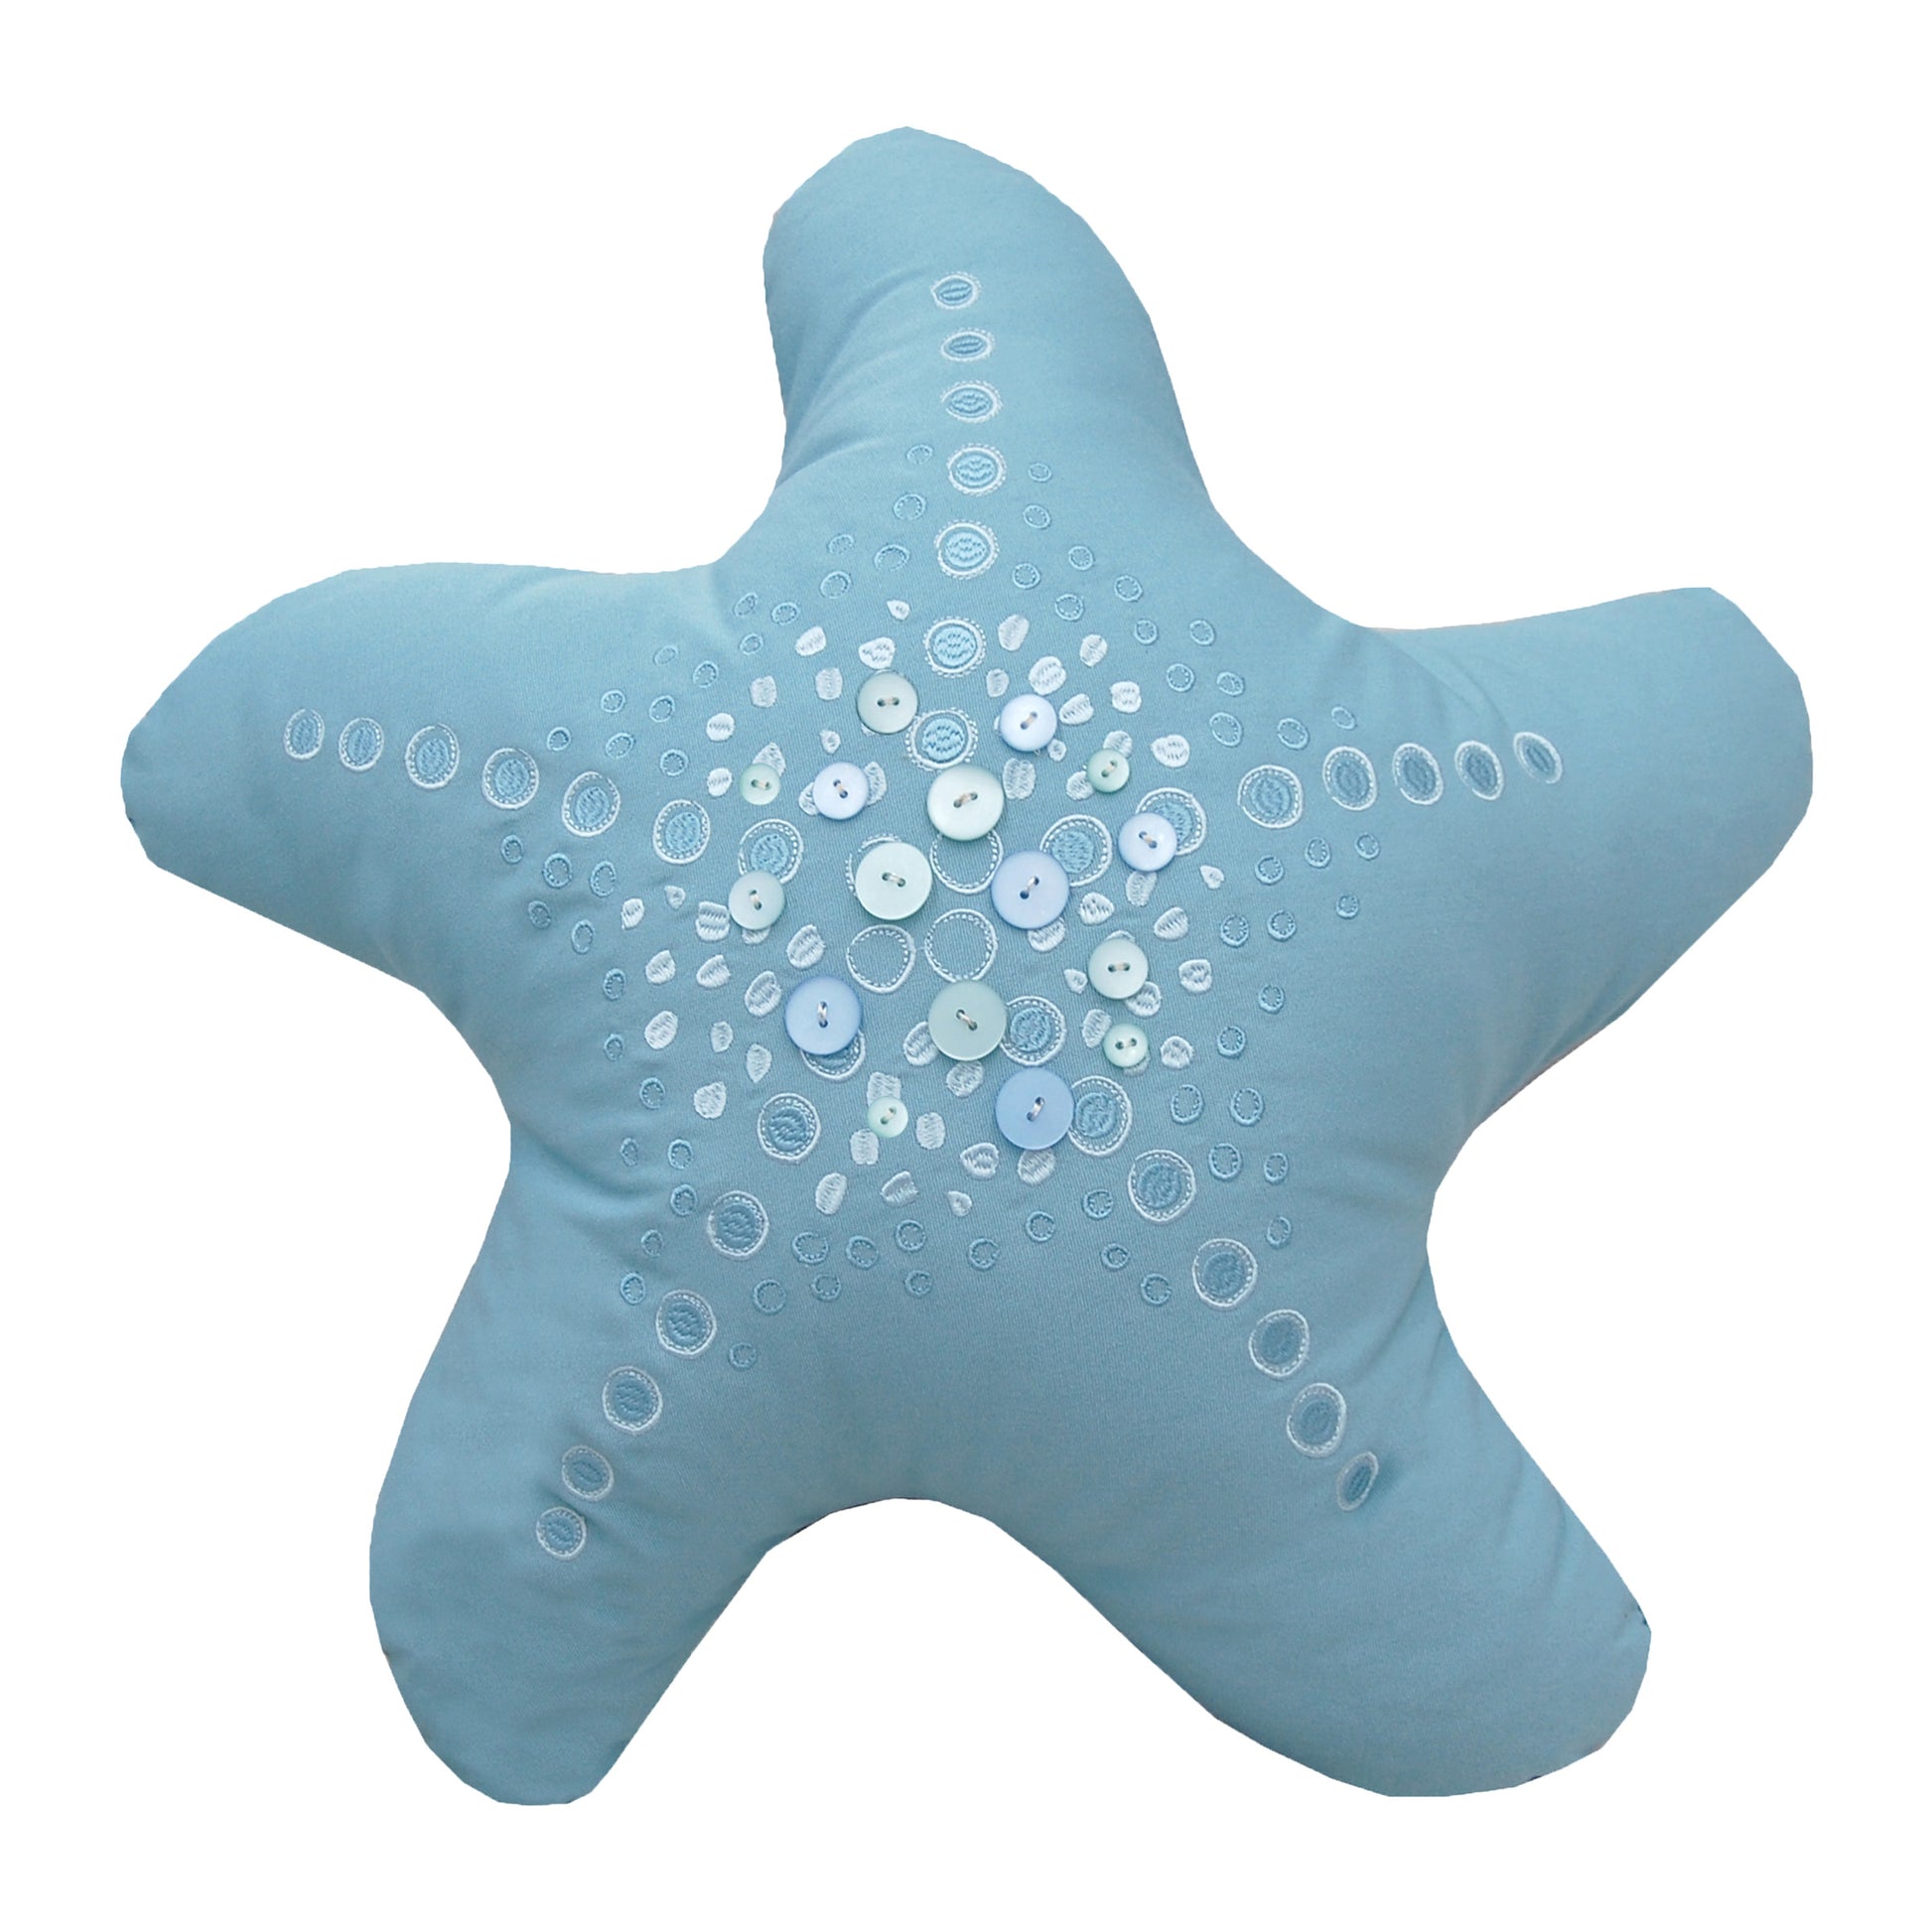 Oceana sea star shaped indoor outdoor pillow with embroidered and beaded accents.